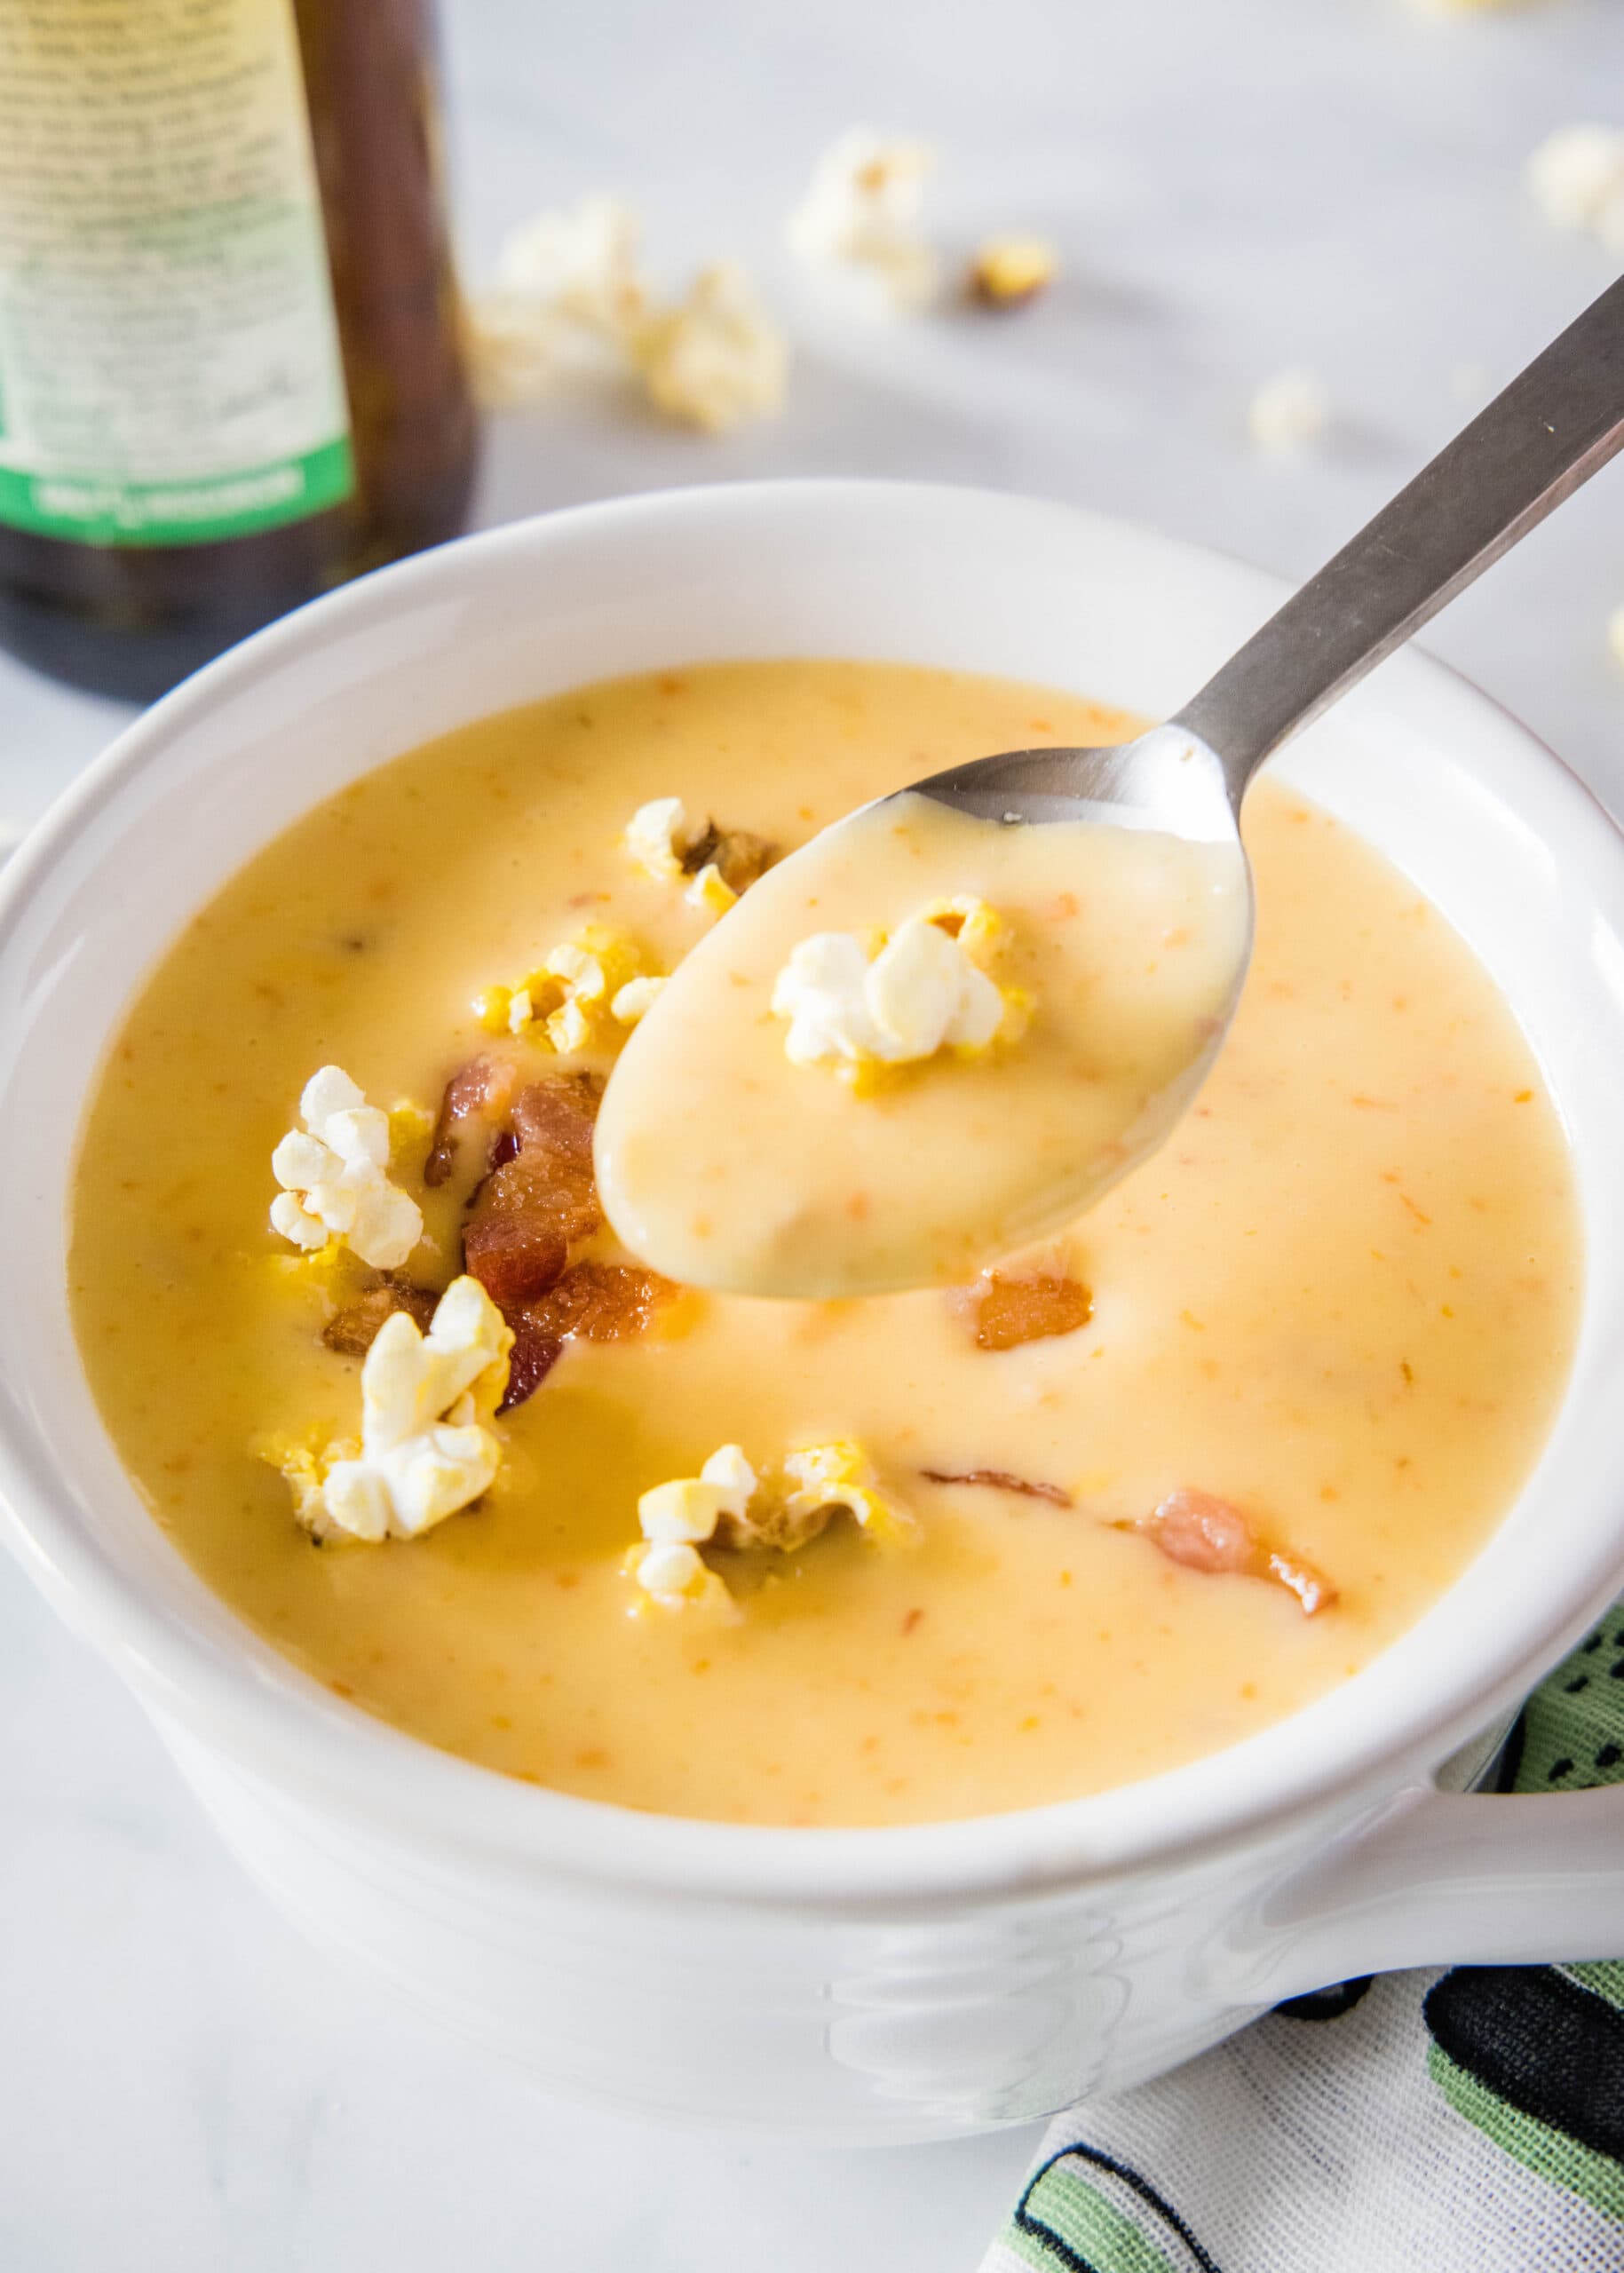 A bowl of cheese soup topped with bacon and popcorn, with a spoon taking a spoonful out, and a bottle of beer in the background